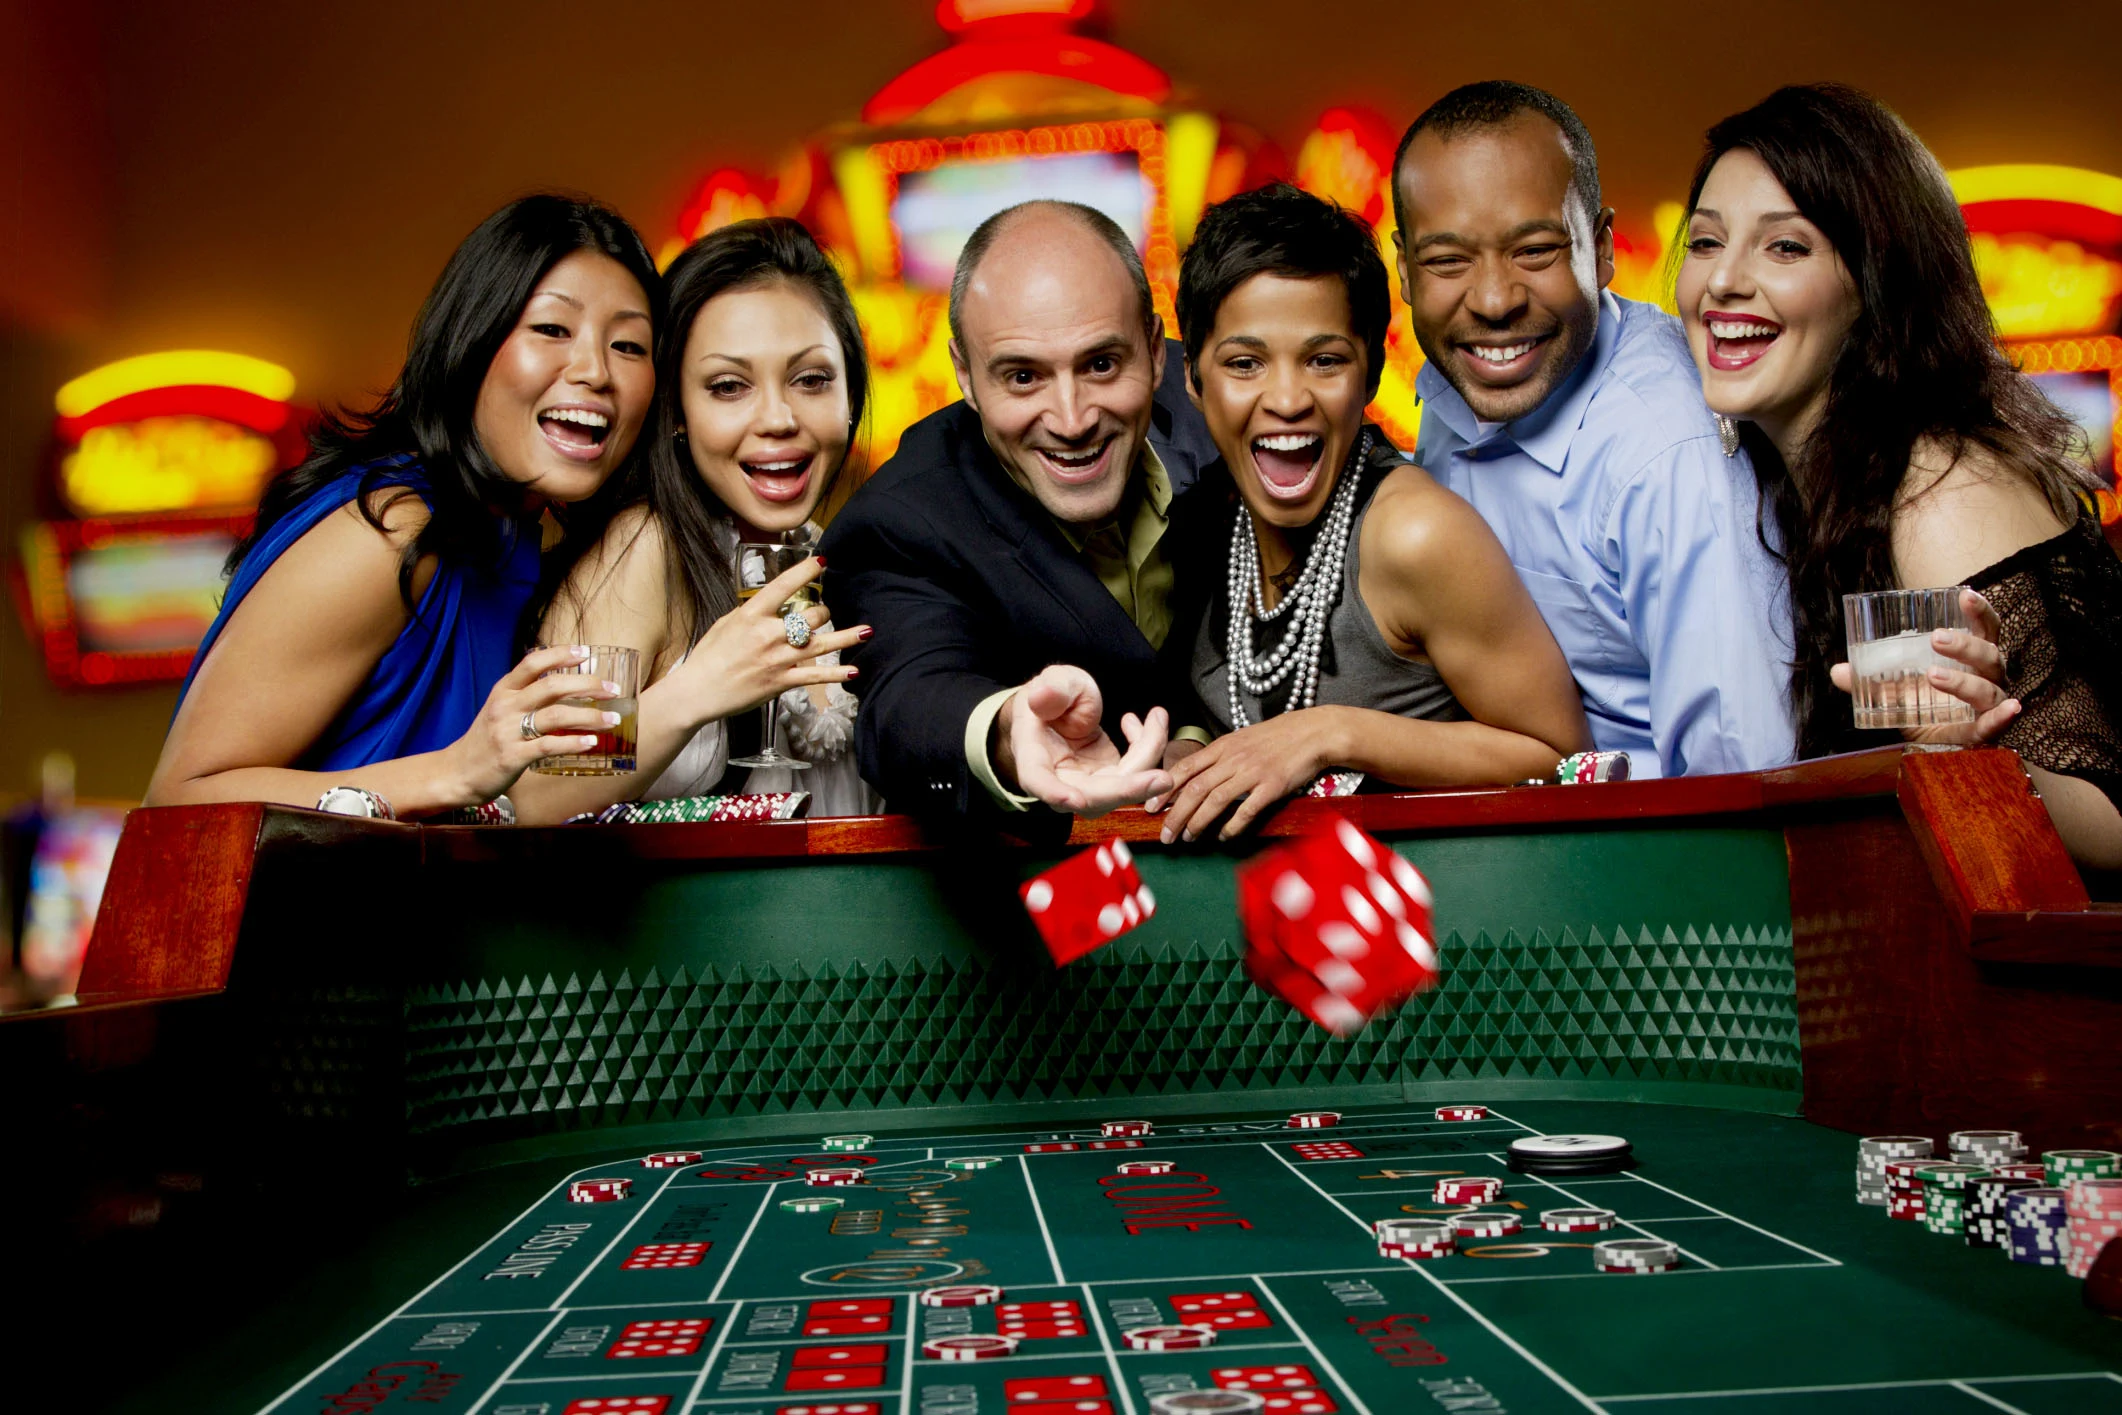 How do you check an online casino trust and reputation? | POPTOPIC